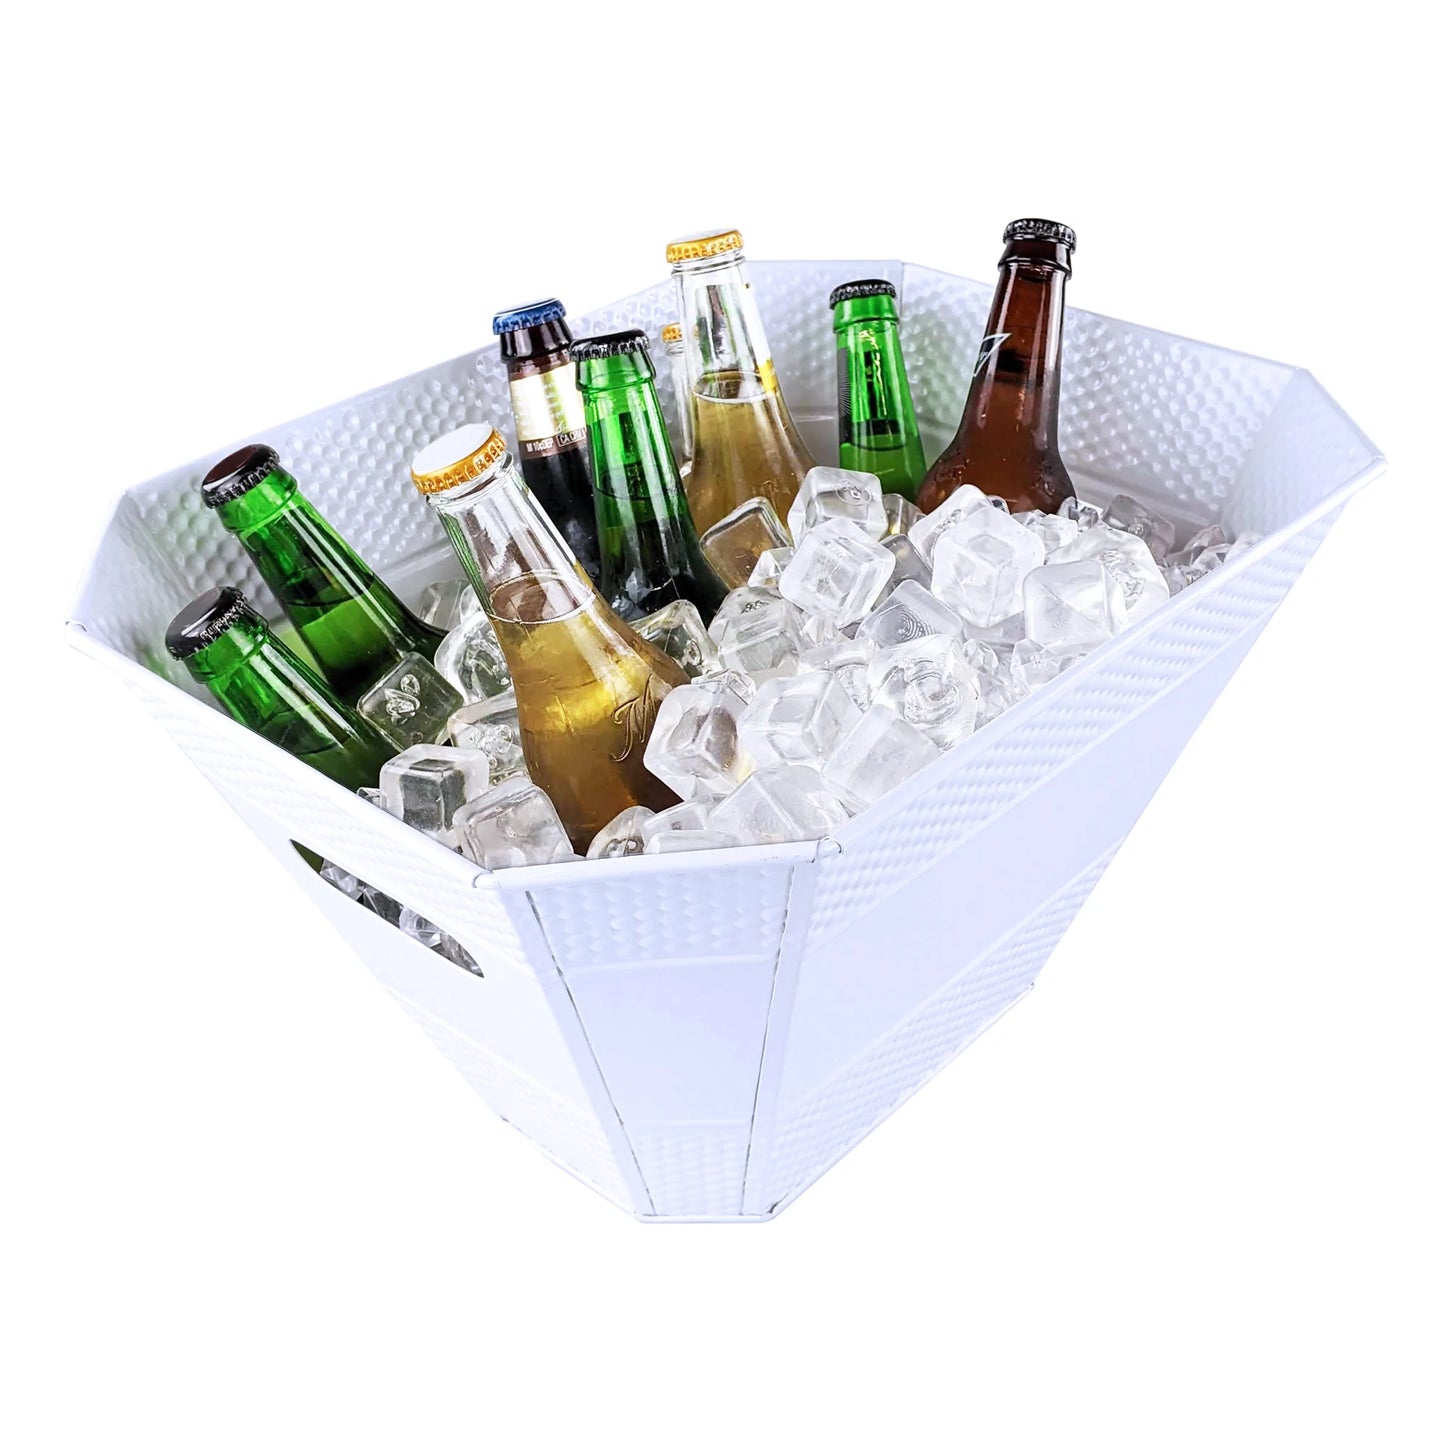 Party bucket to chill beer, wine, or drinks at a party.  Made of metal in white with easy to clean premium high glossy finish. Great for wedding, anniversary, birthday, or holiday party use.  Use in the kitchen, dining room, bar or the patio